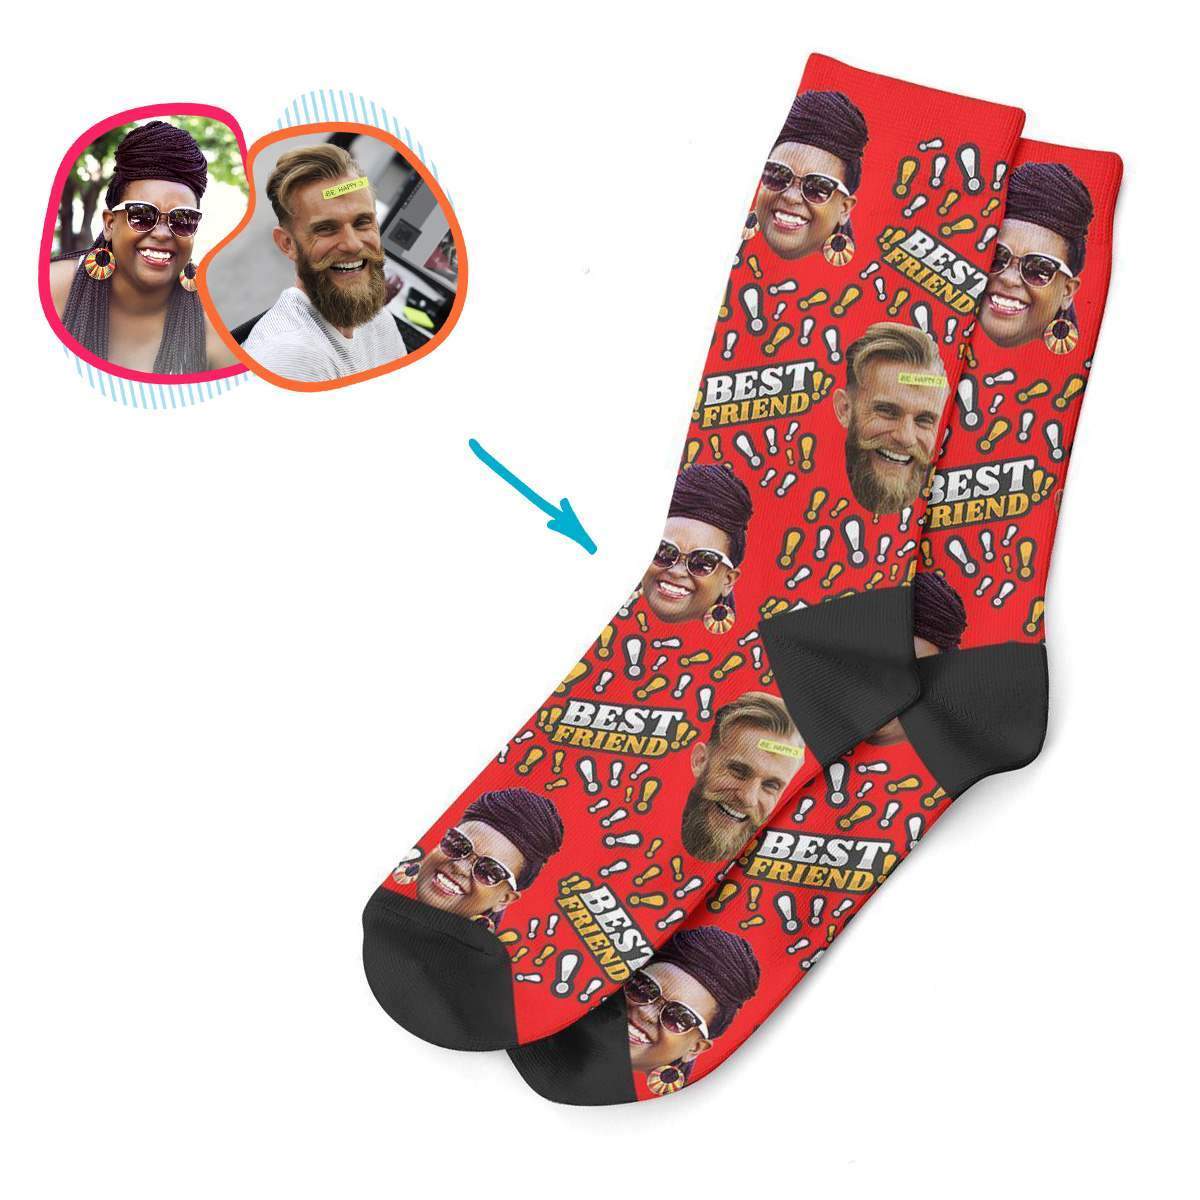 red Best Friend socks personalized with photo of face printed on them